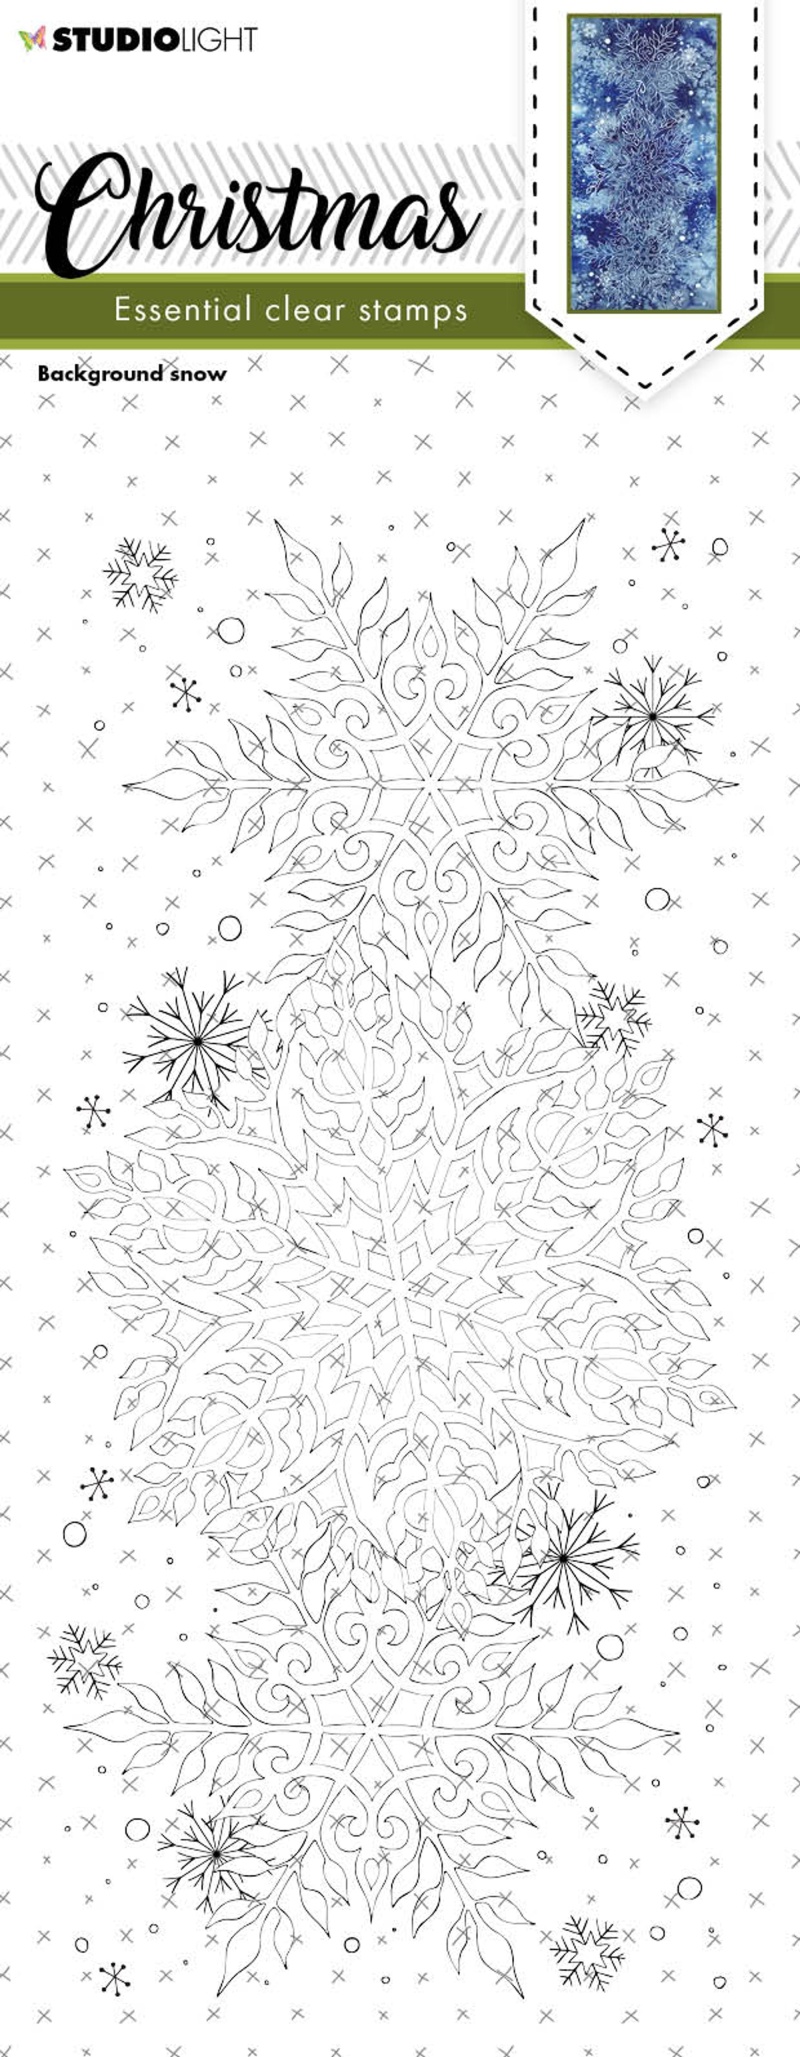 Sl Clear Stamp Christmas Background Snow Essentials 105X210x3mm 1 Pc Nr.239